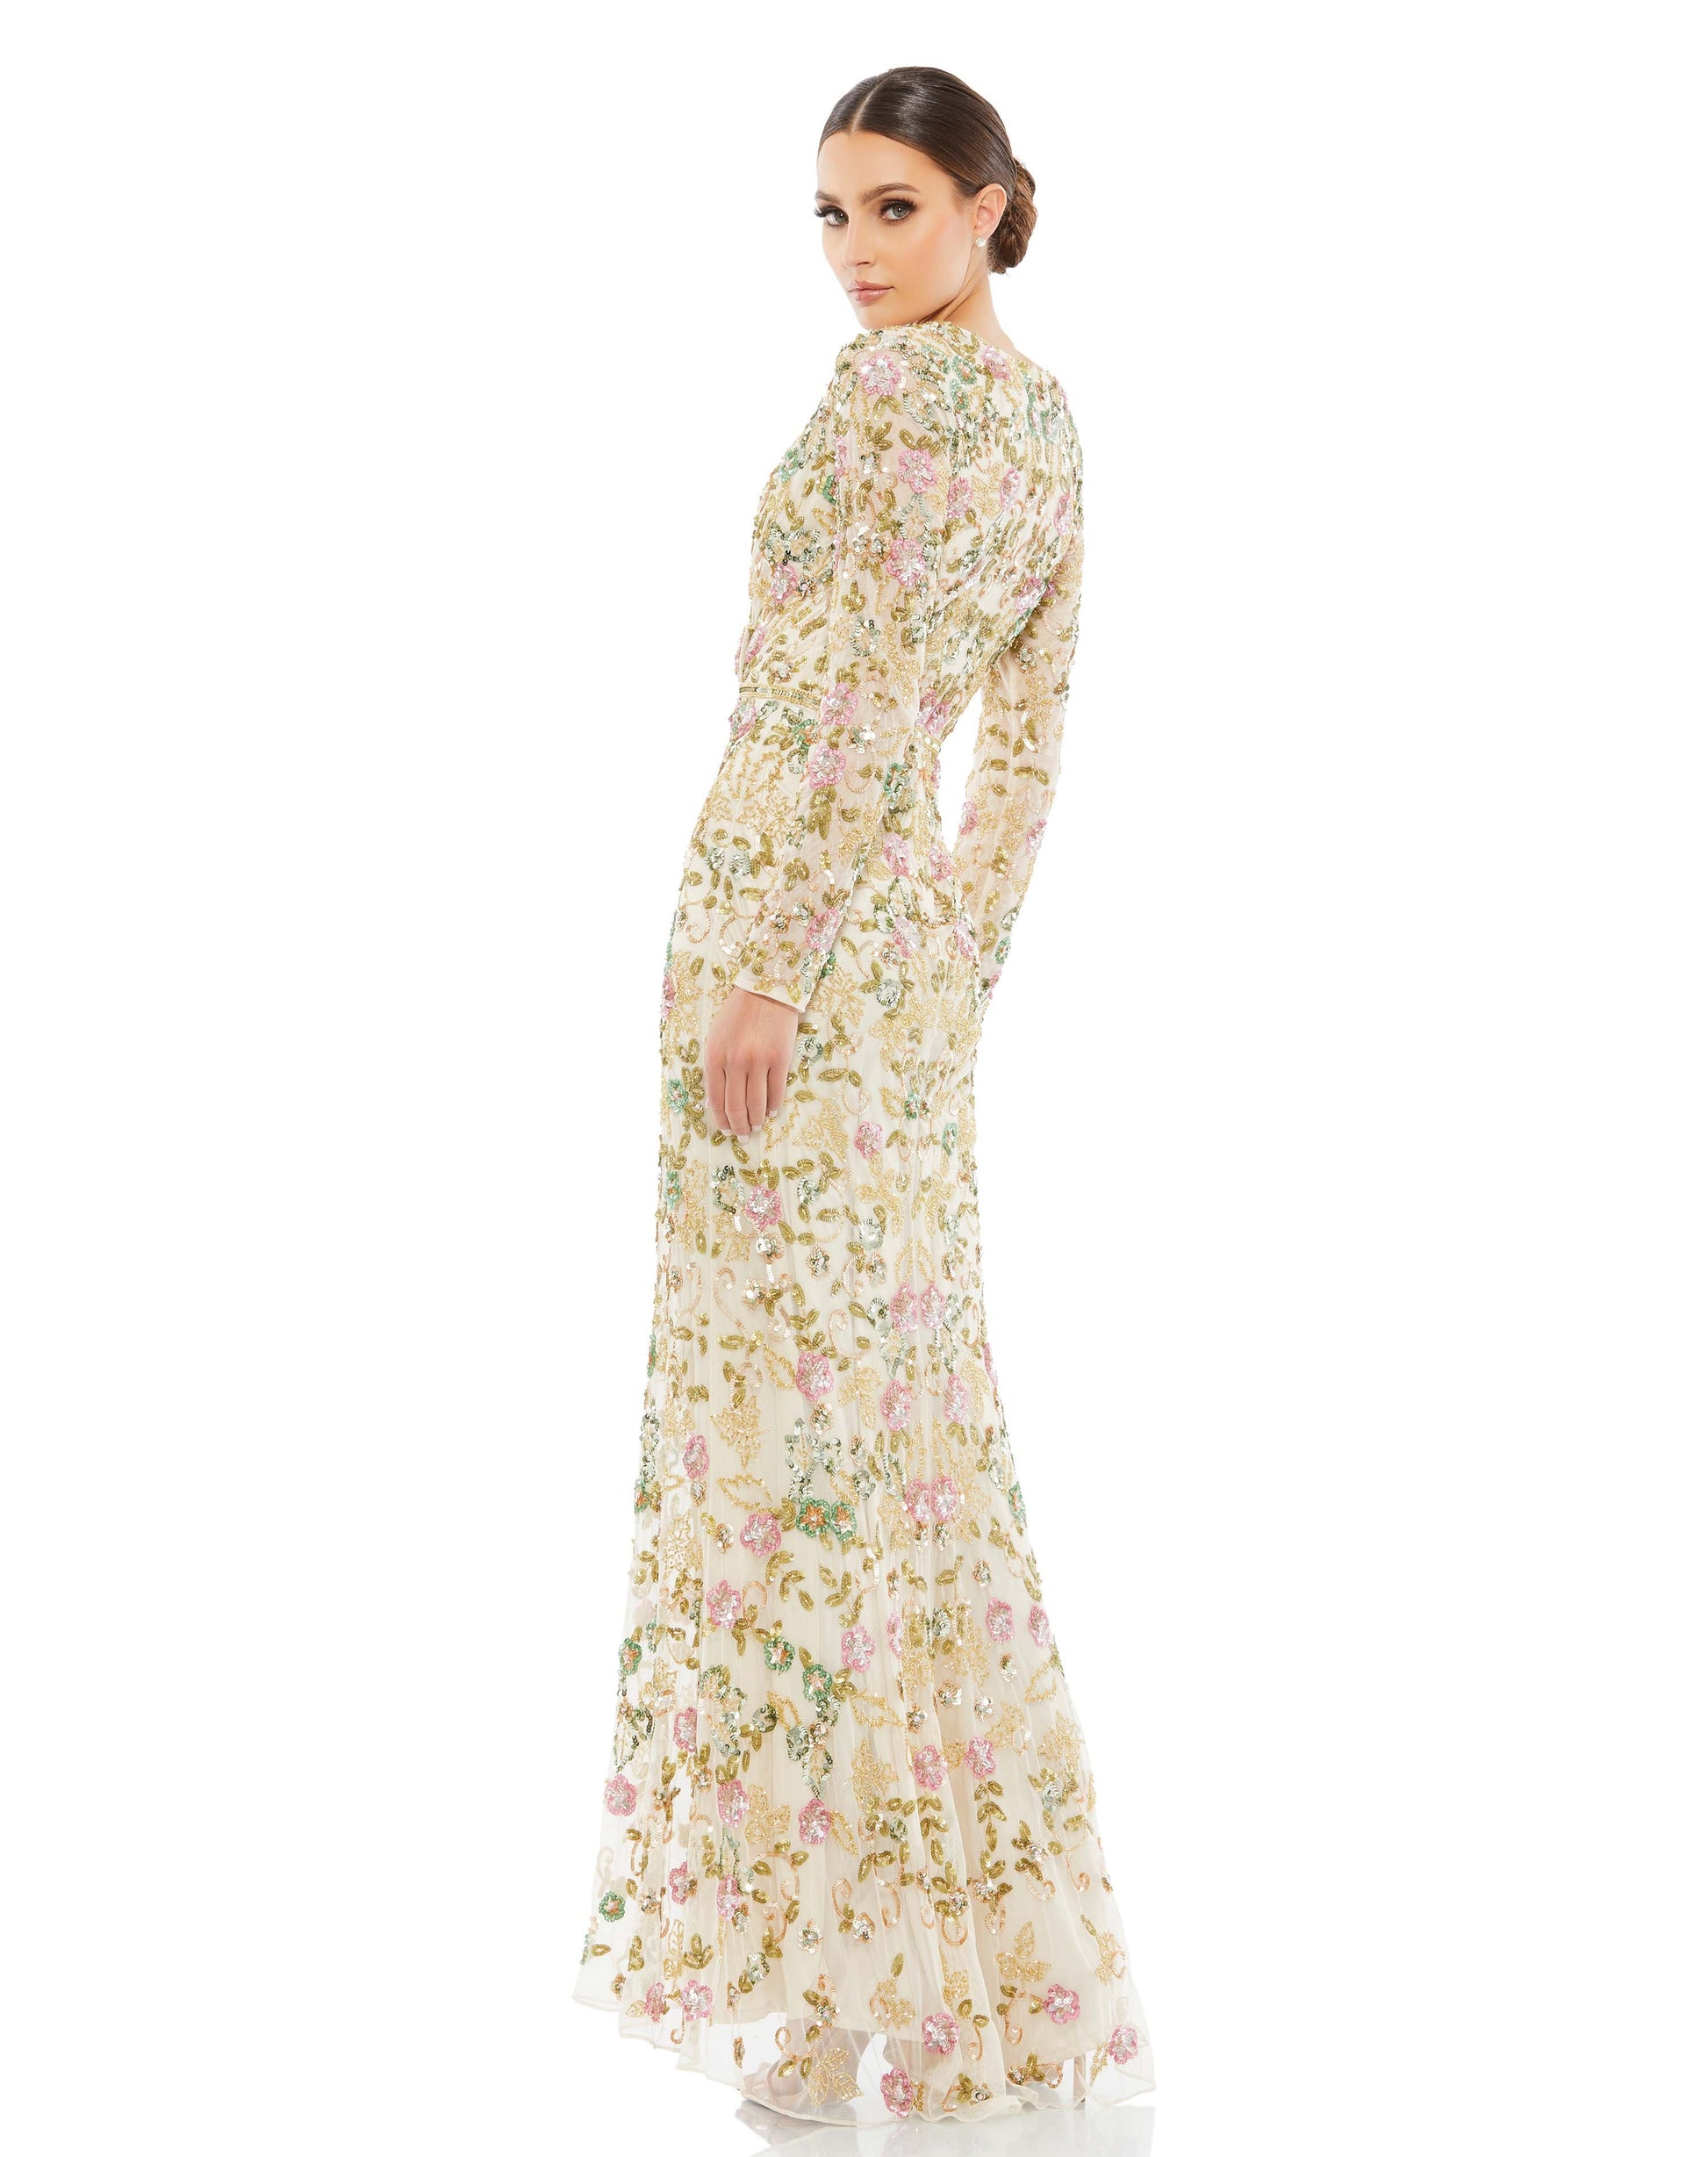 What is it about this gown we love so much? Everything. Embellished with a botanical-inspired pattern of sequins and beads, the dress is designed with a fitted silhouette, surplice neckline, pleated bodice, sheer long sleeves, and a flared hem punctuated